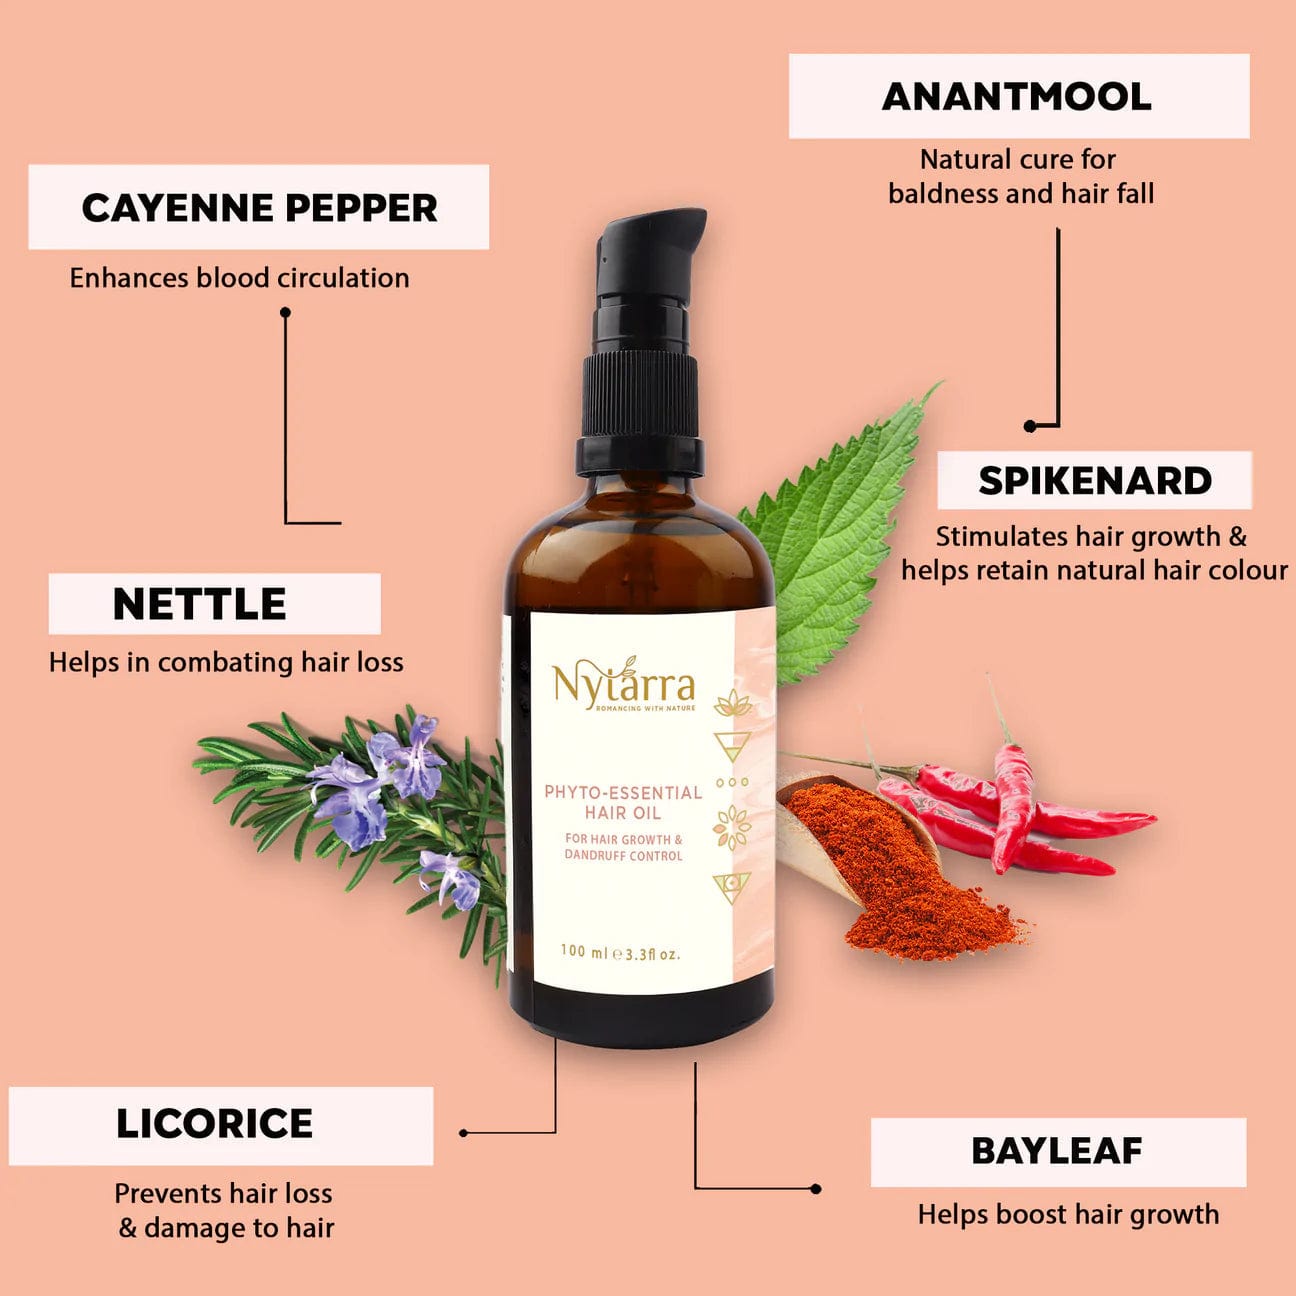 Nytarra Naturals Oil Phyto-Essential Hair Oil